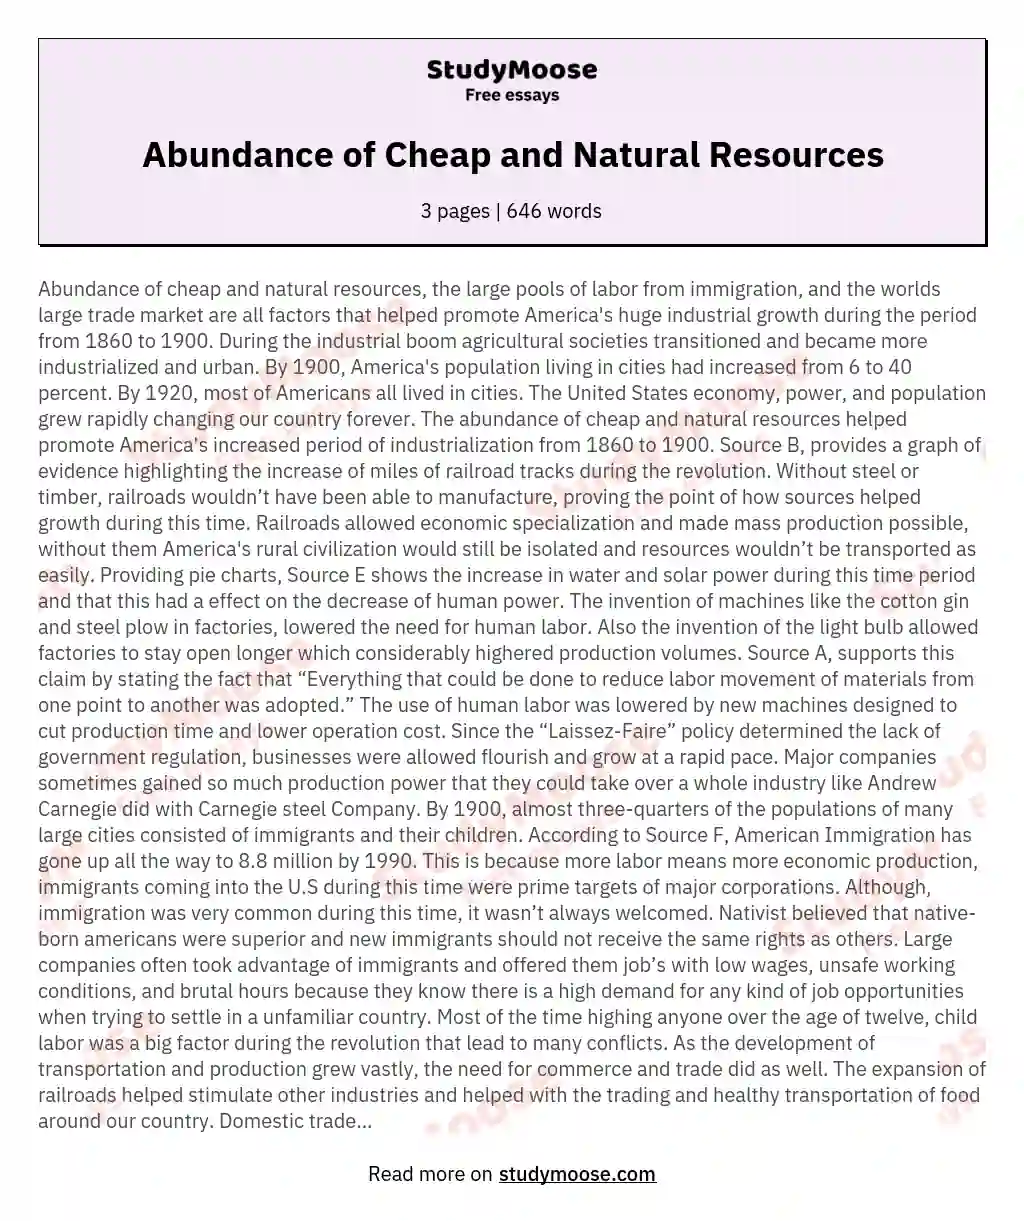 Abundance of Cheap and Natural Resources essay